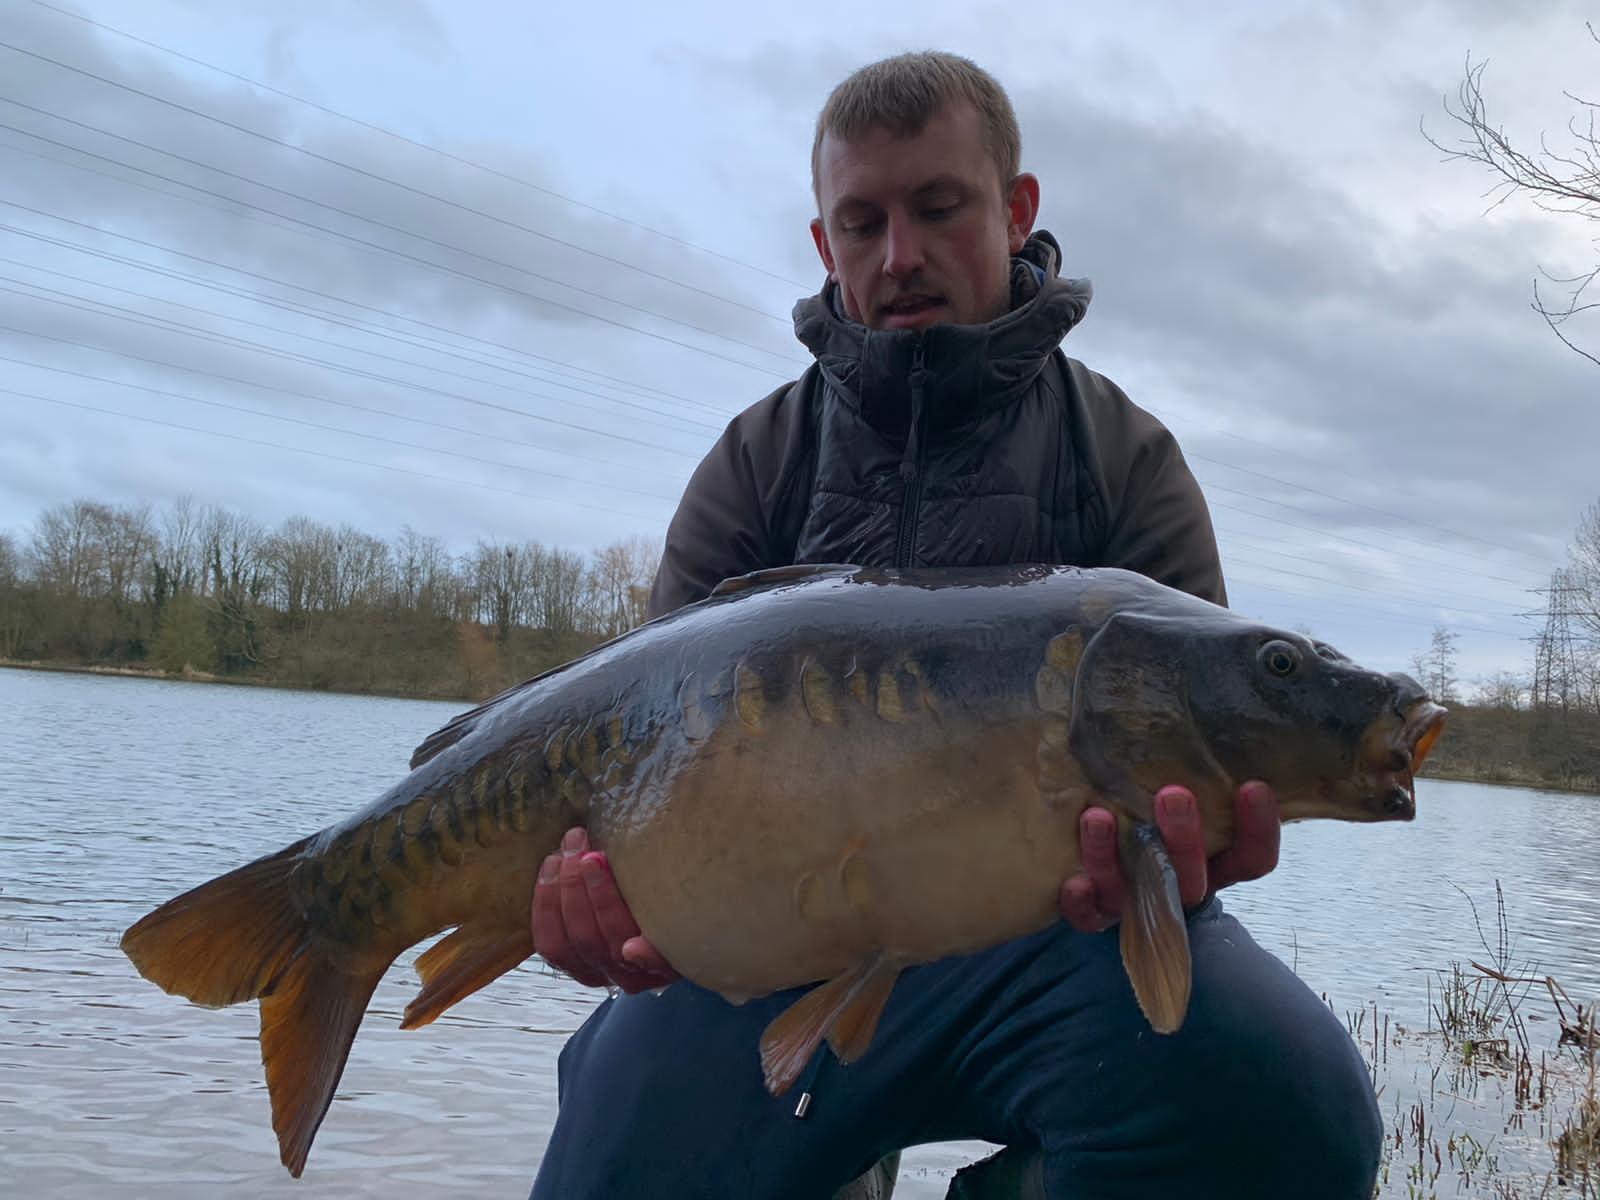 Jack Webb with the 25lb mirror carp he caught at Grey Mist Mere